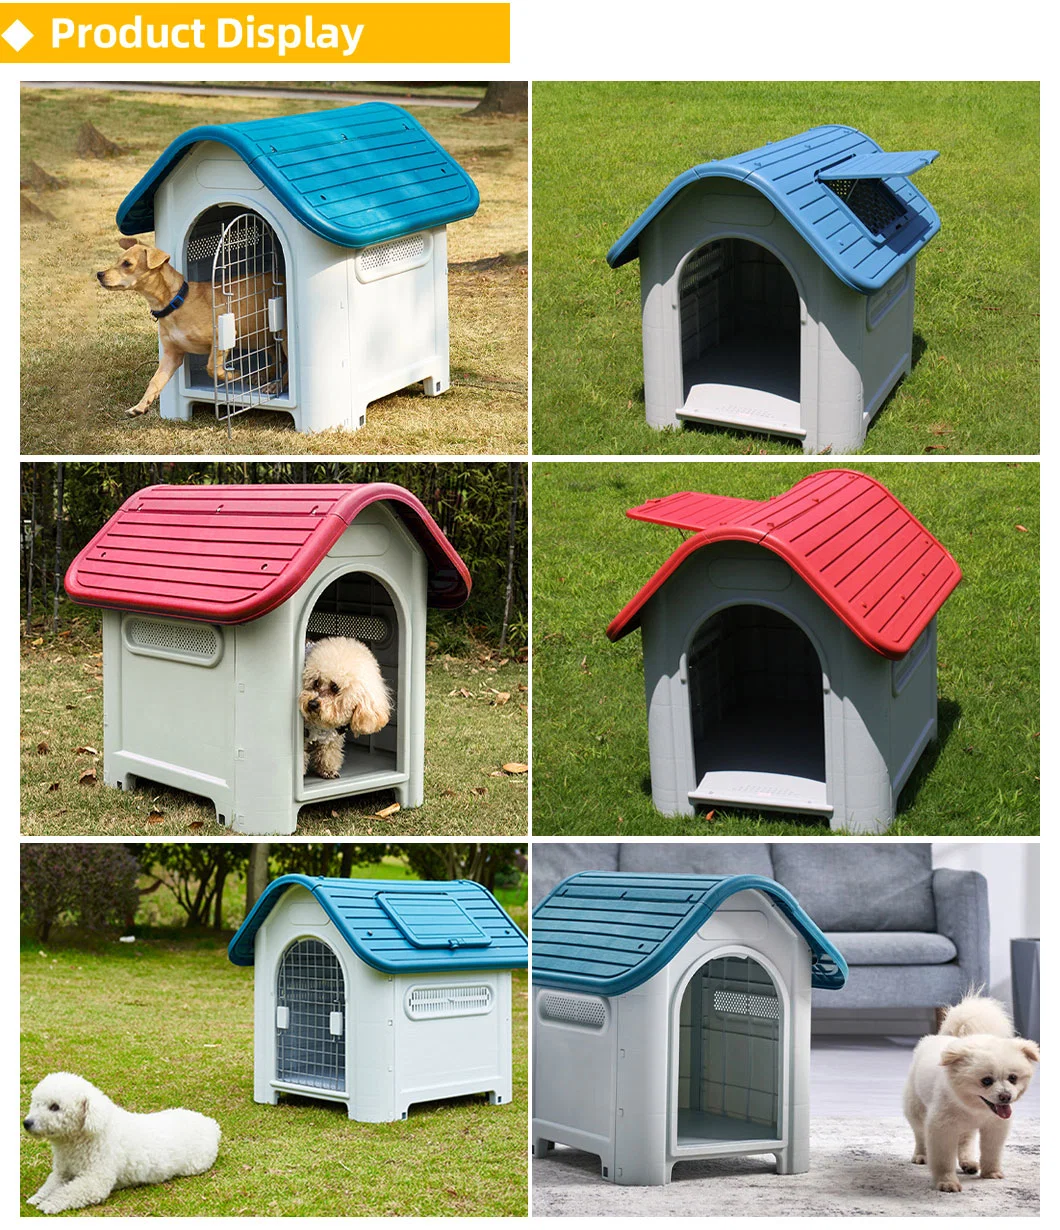 Big Home Furniture Dog House All-Season Availability Outdoor/Indoor Luxury Cat Crate Kennel Eco-Friendly Waterproof Durable Plastic Pet House with Window